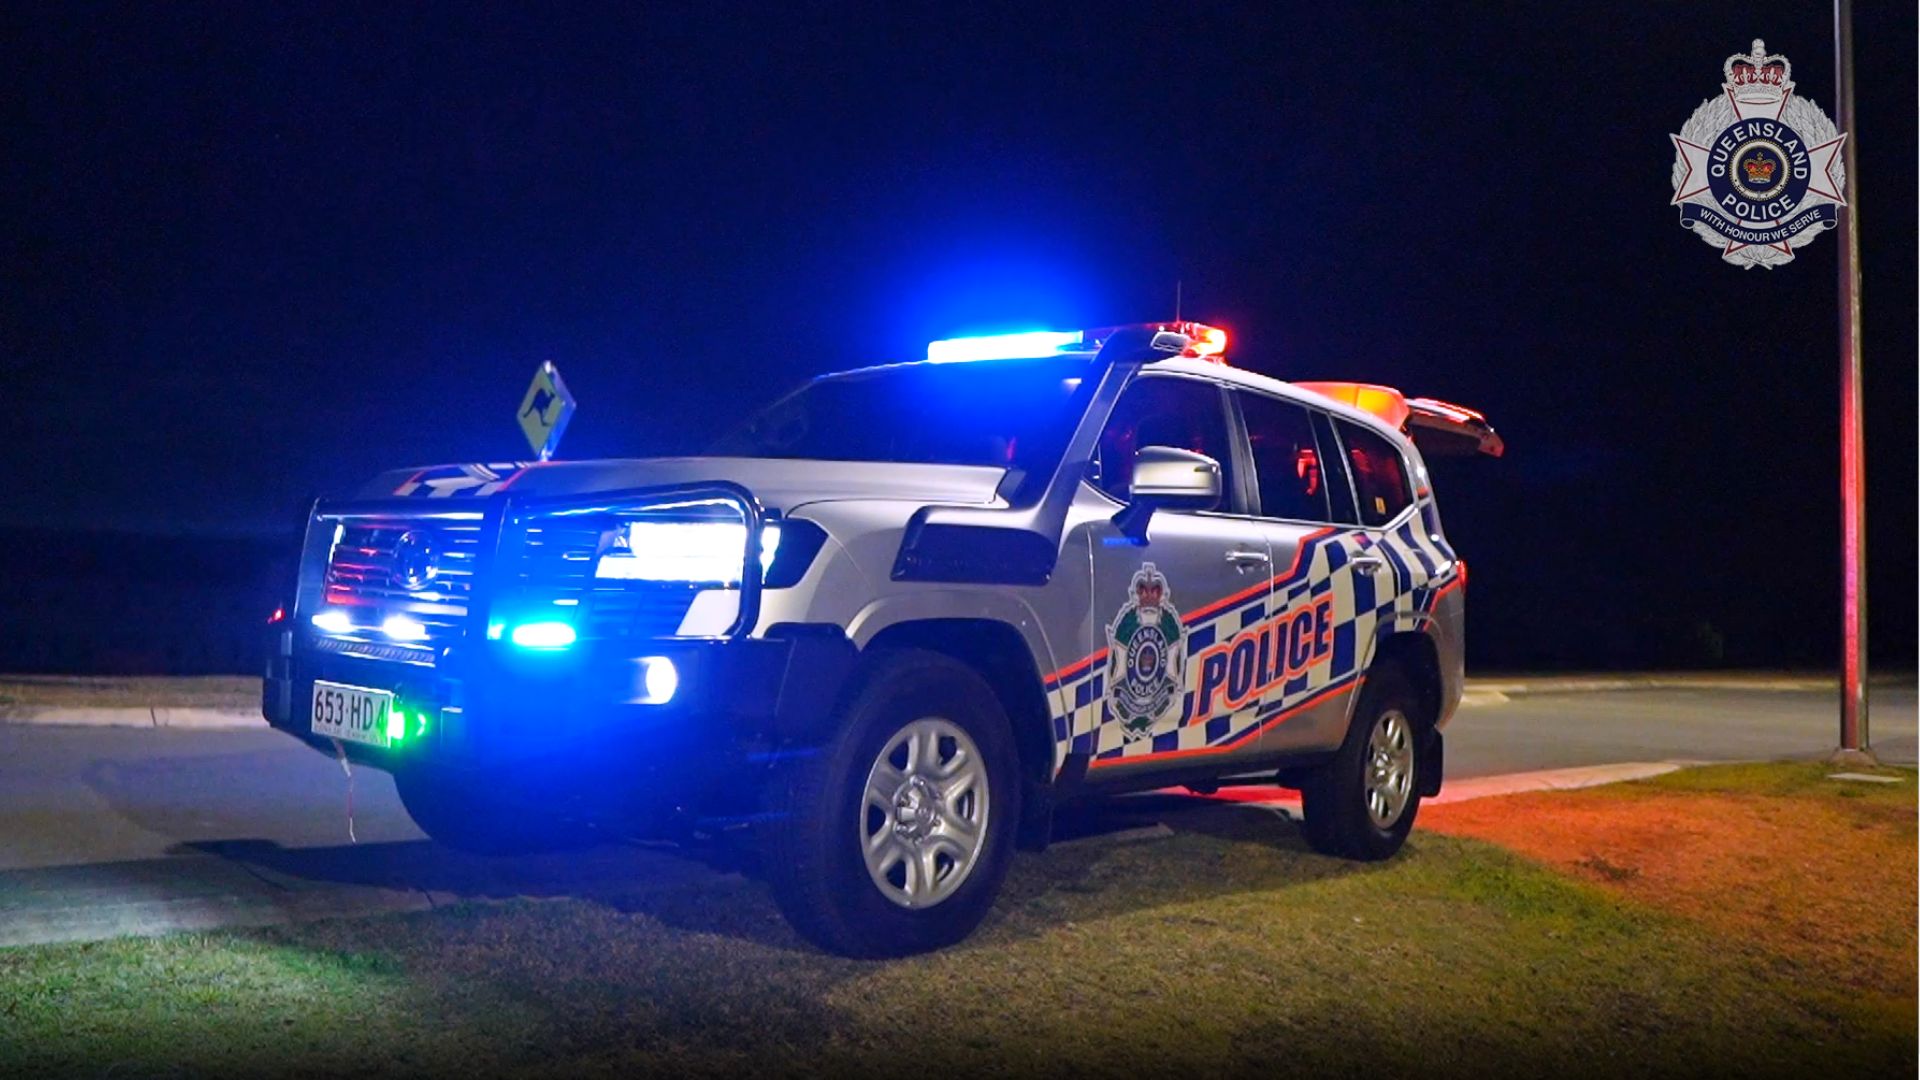 The Toyota Land Cruiser police vehicle for the Queensland Police Service